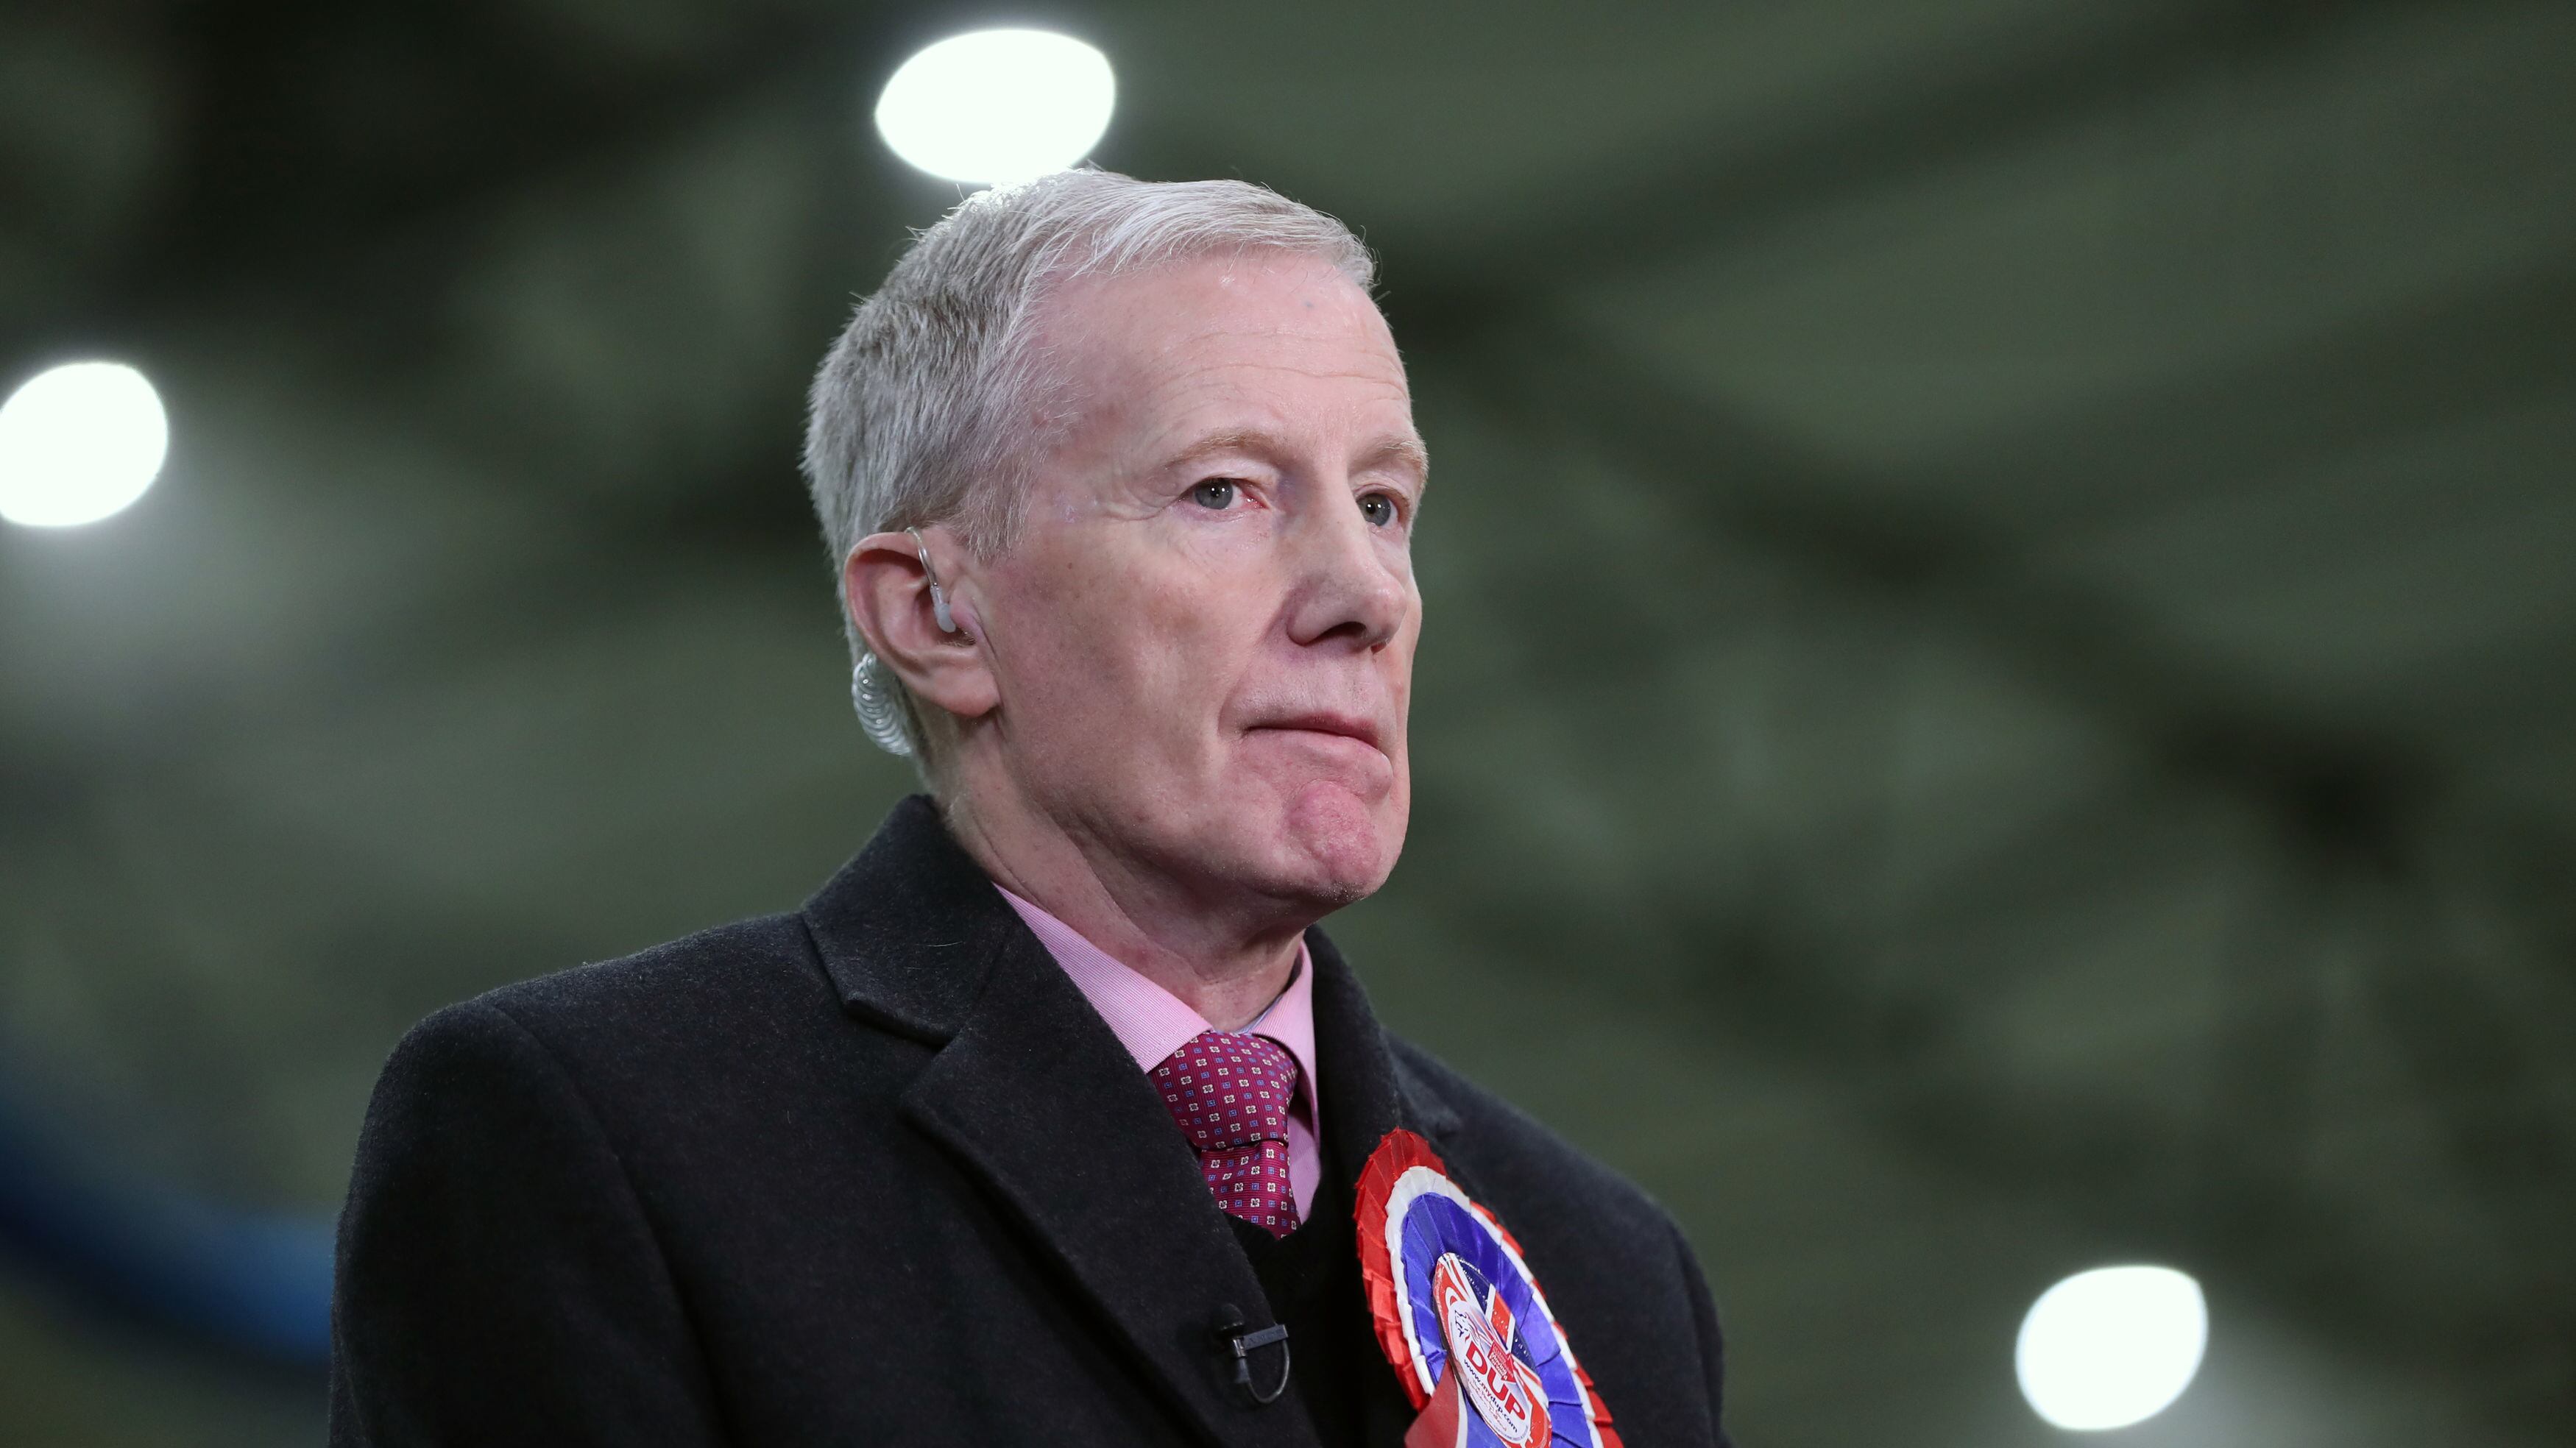 DUP East Derry MP Gregory Campbell said the party had not completed its selection processes